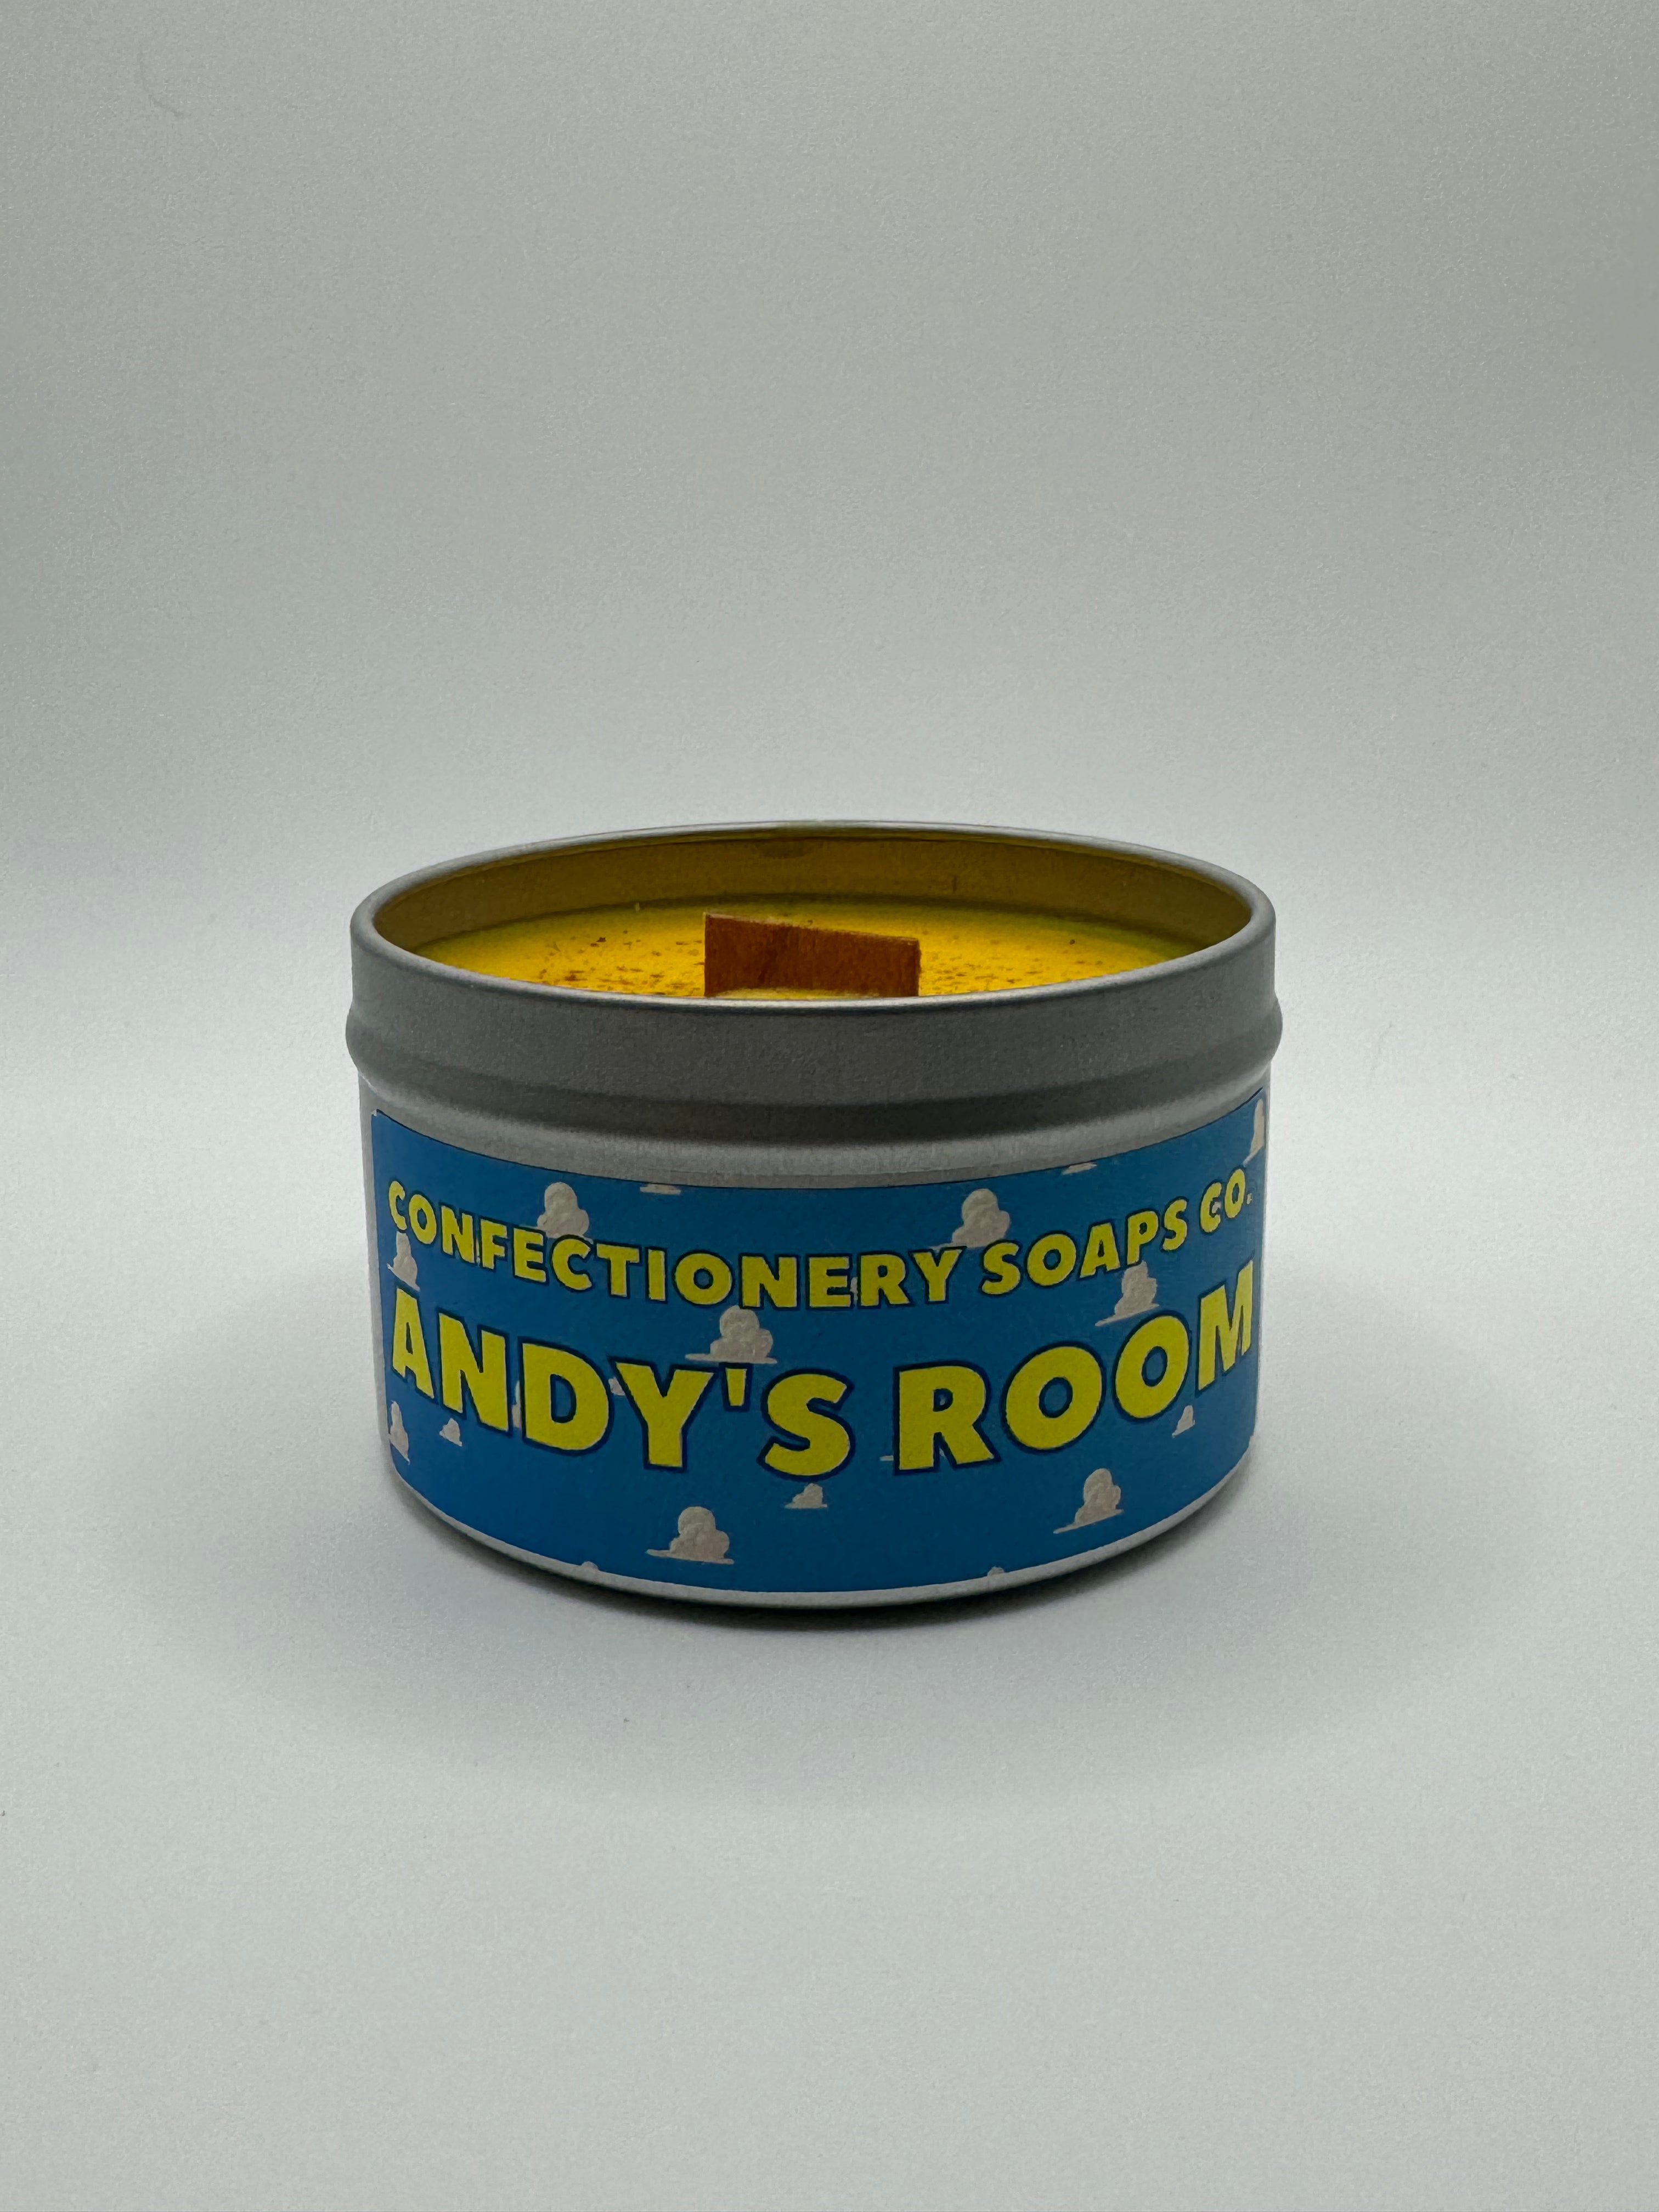 Andy's Room Candle